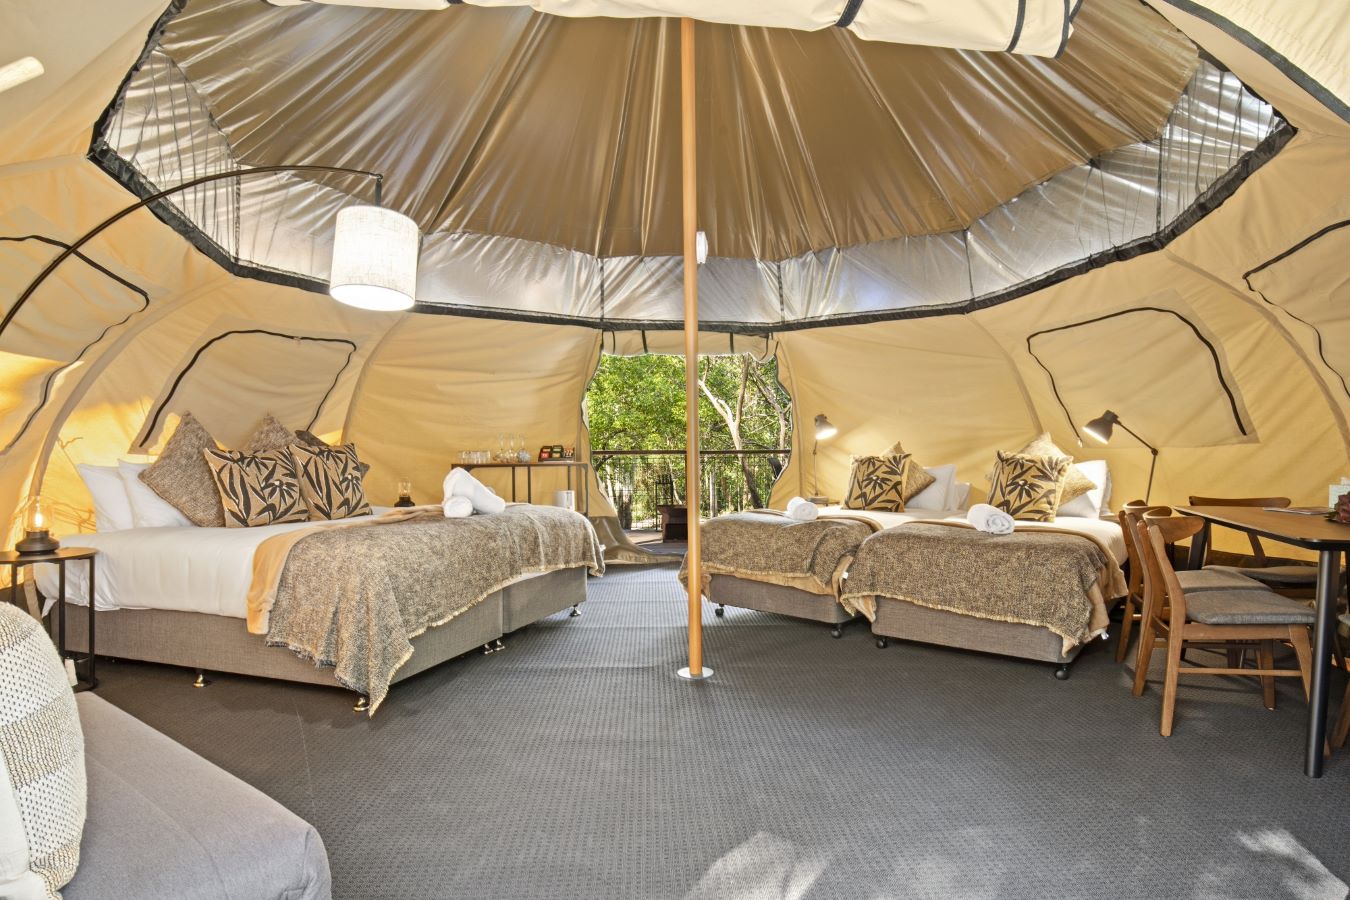 Woodlands Family Tents